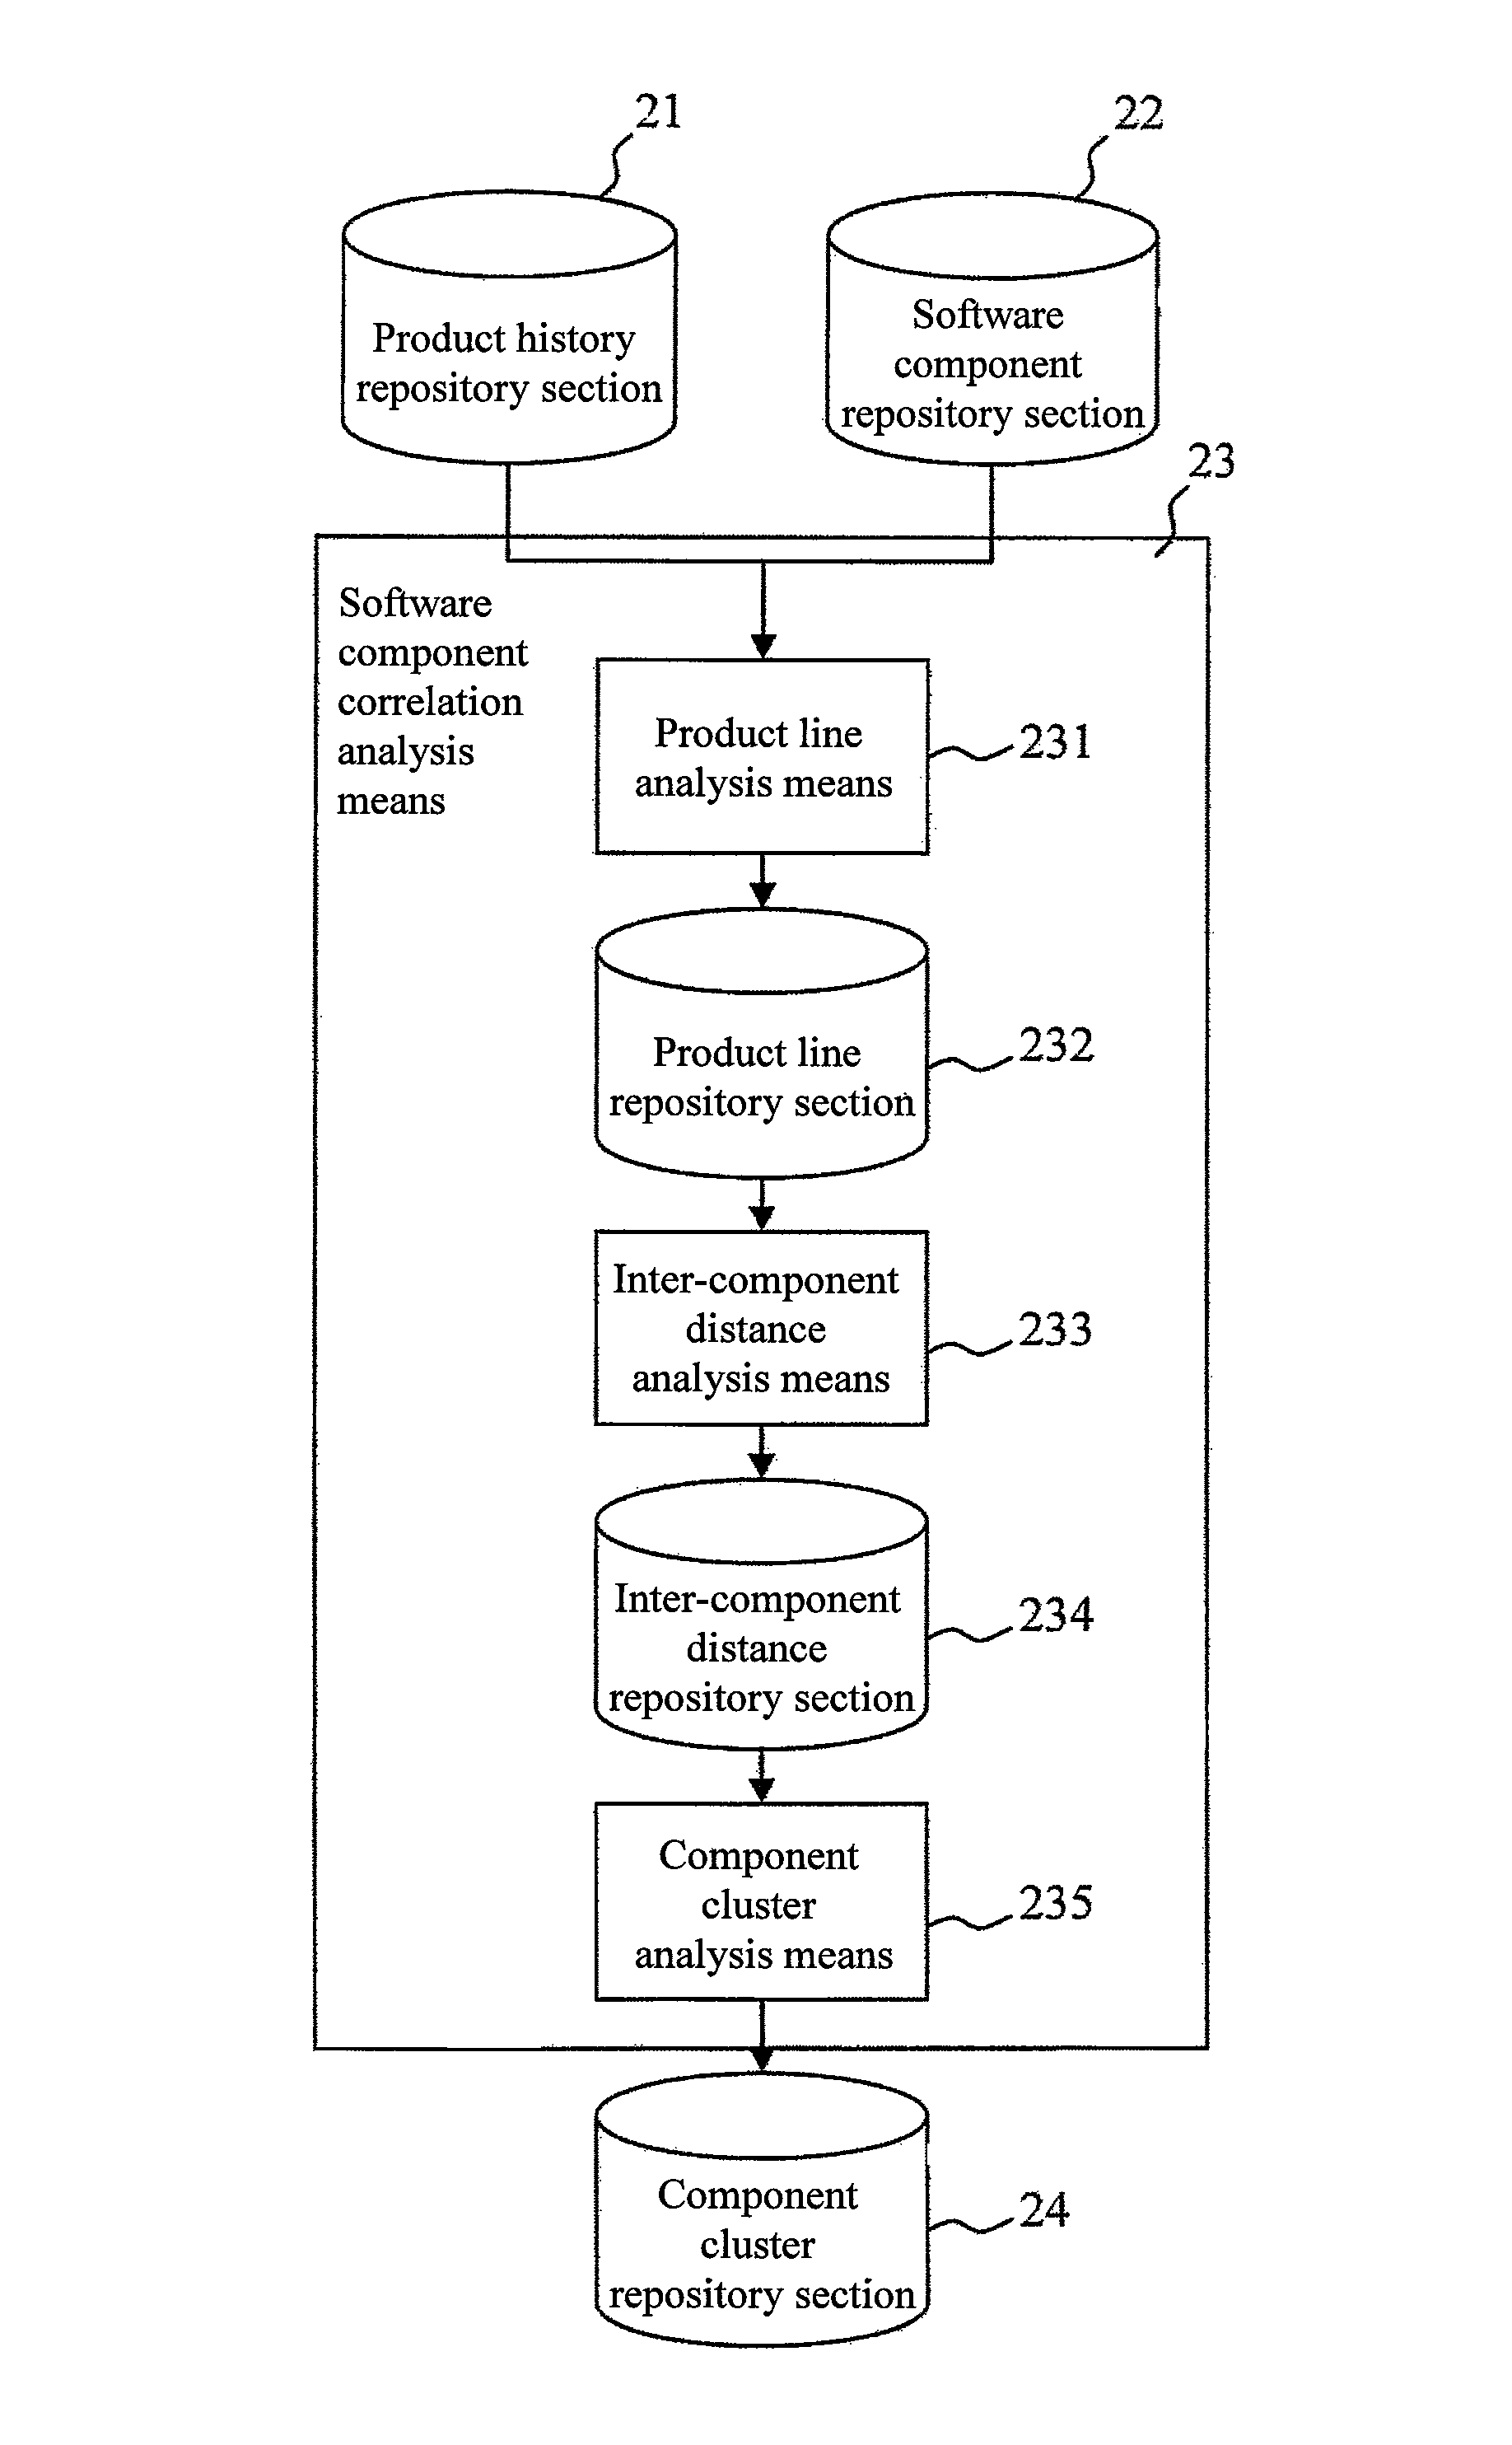 Software analyzing apparatus for analyzing software components and correlations between software components